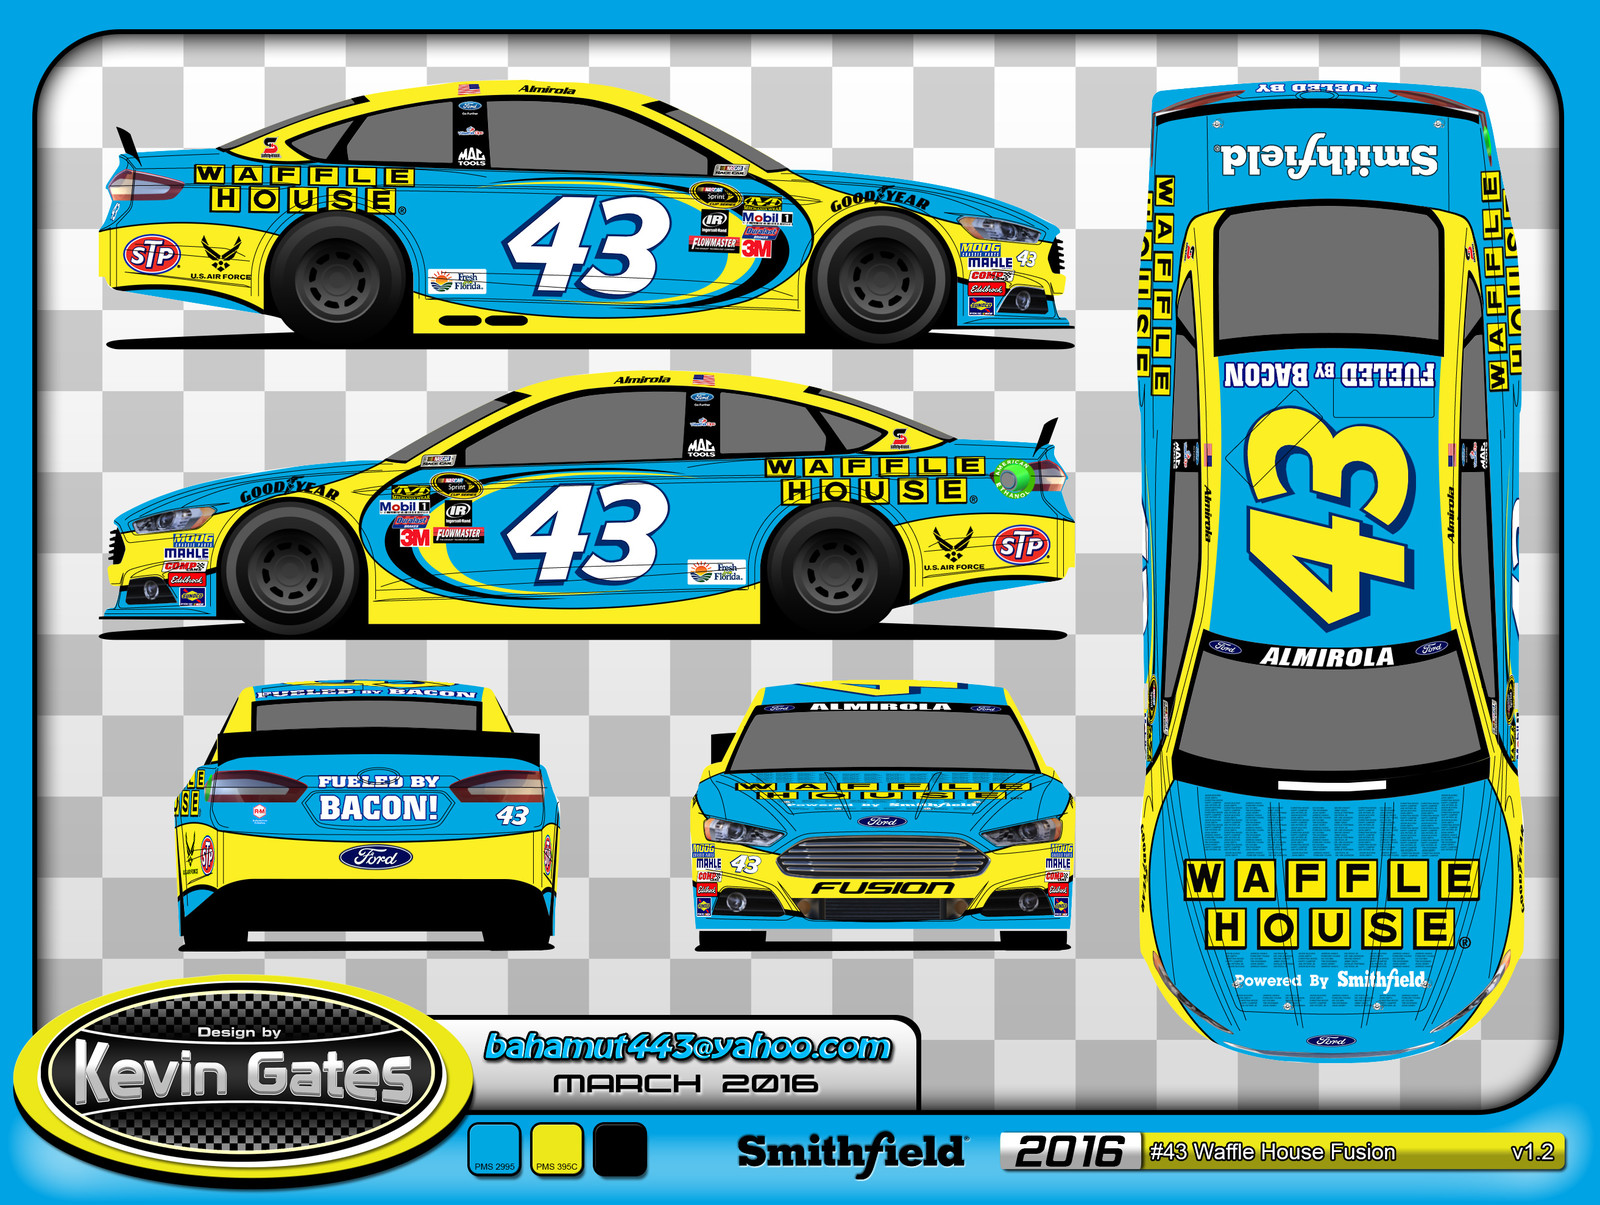 Original vector art of the 2016 #43 Waffle House Ford Fusion